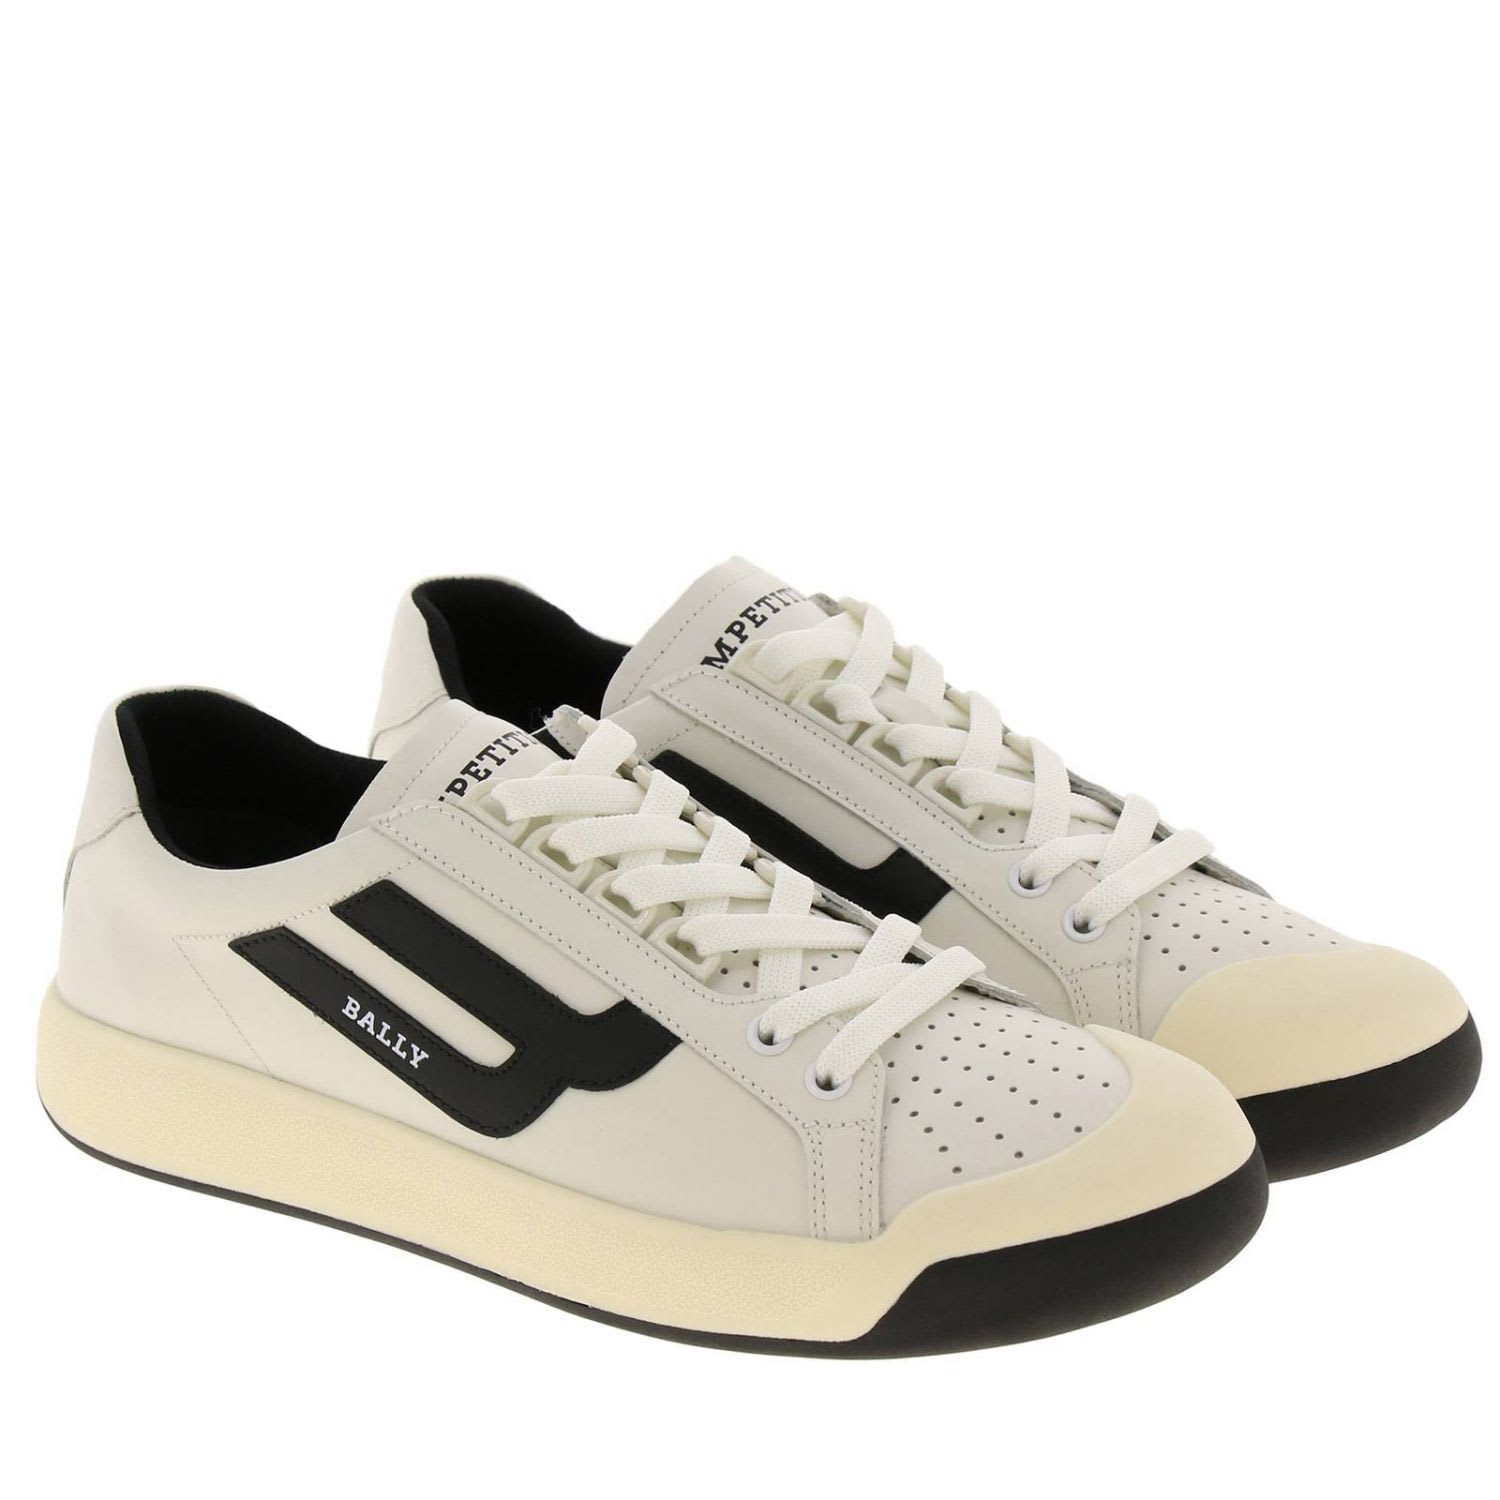 Bally Bally Sneakers New Competition Bally Sneakers In Leather With ...